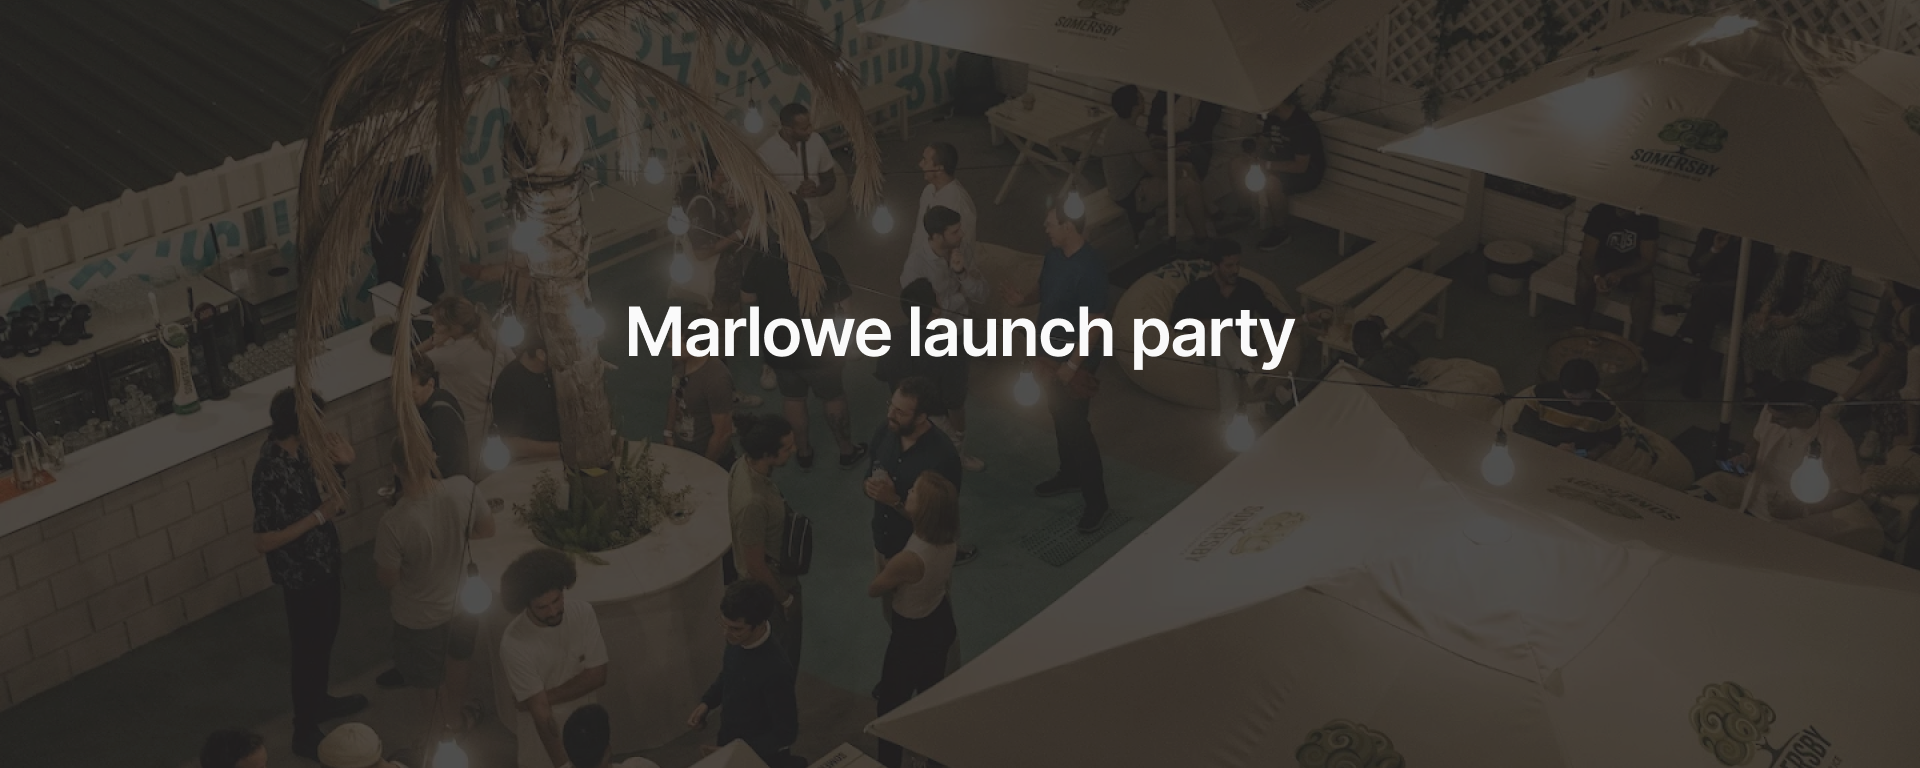 Marlowe launch party: celebrating the future of smart contracts